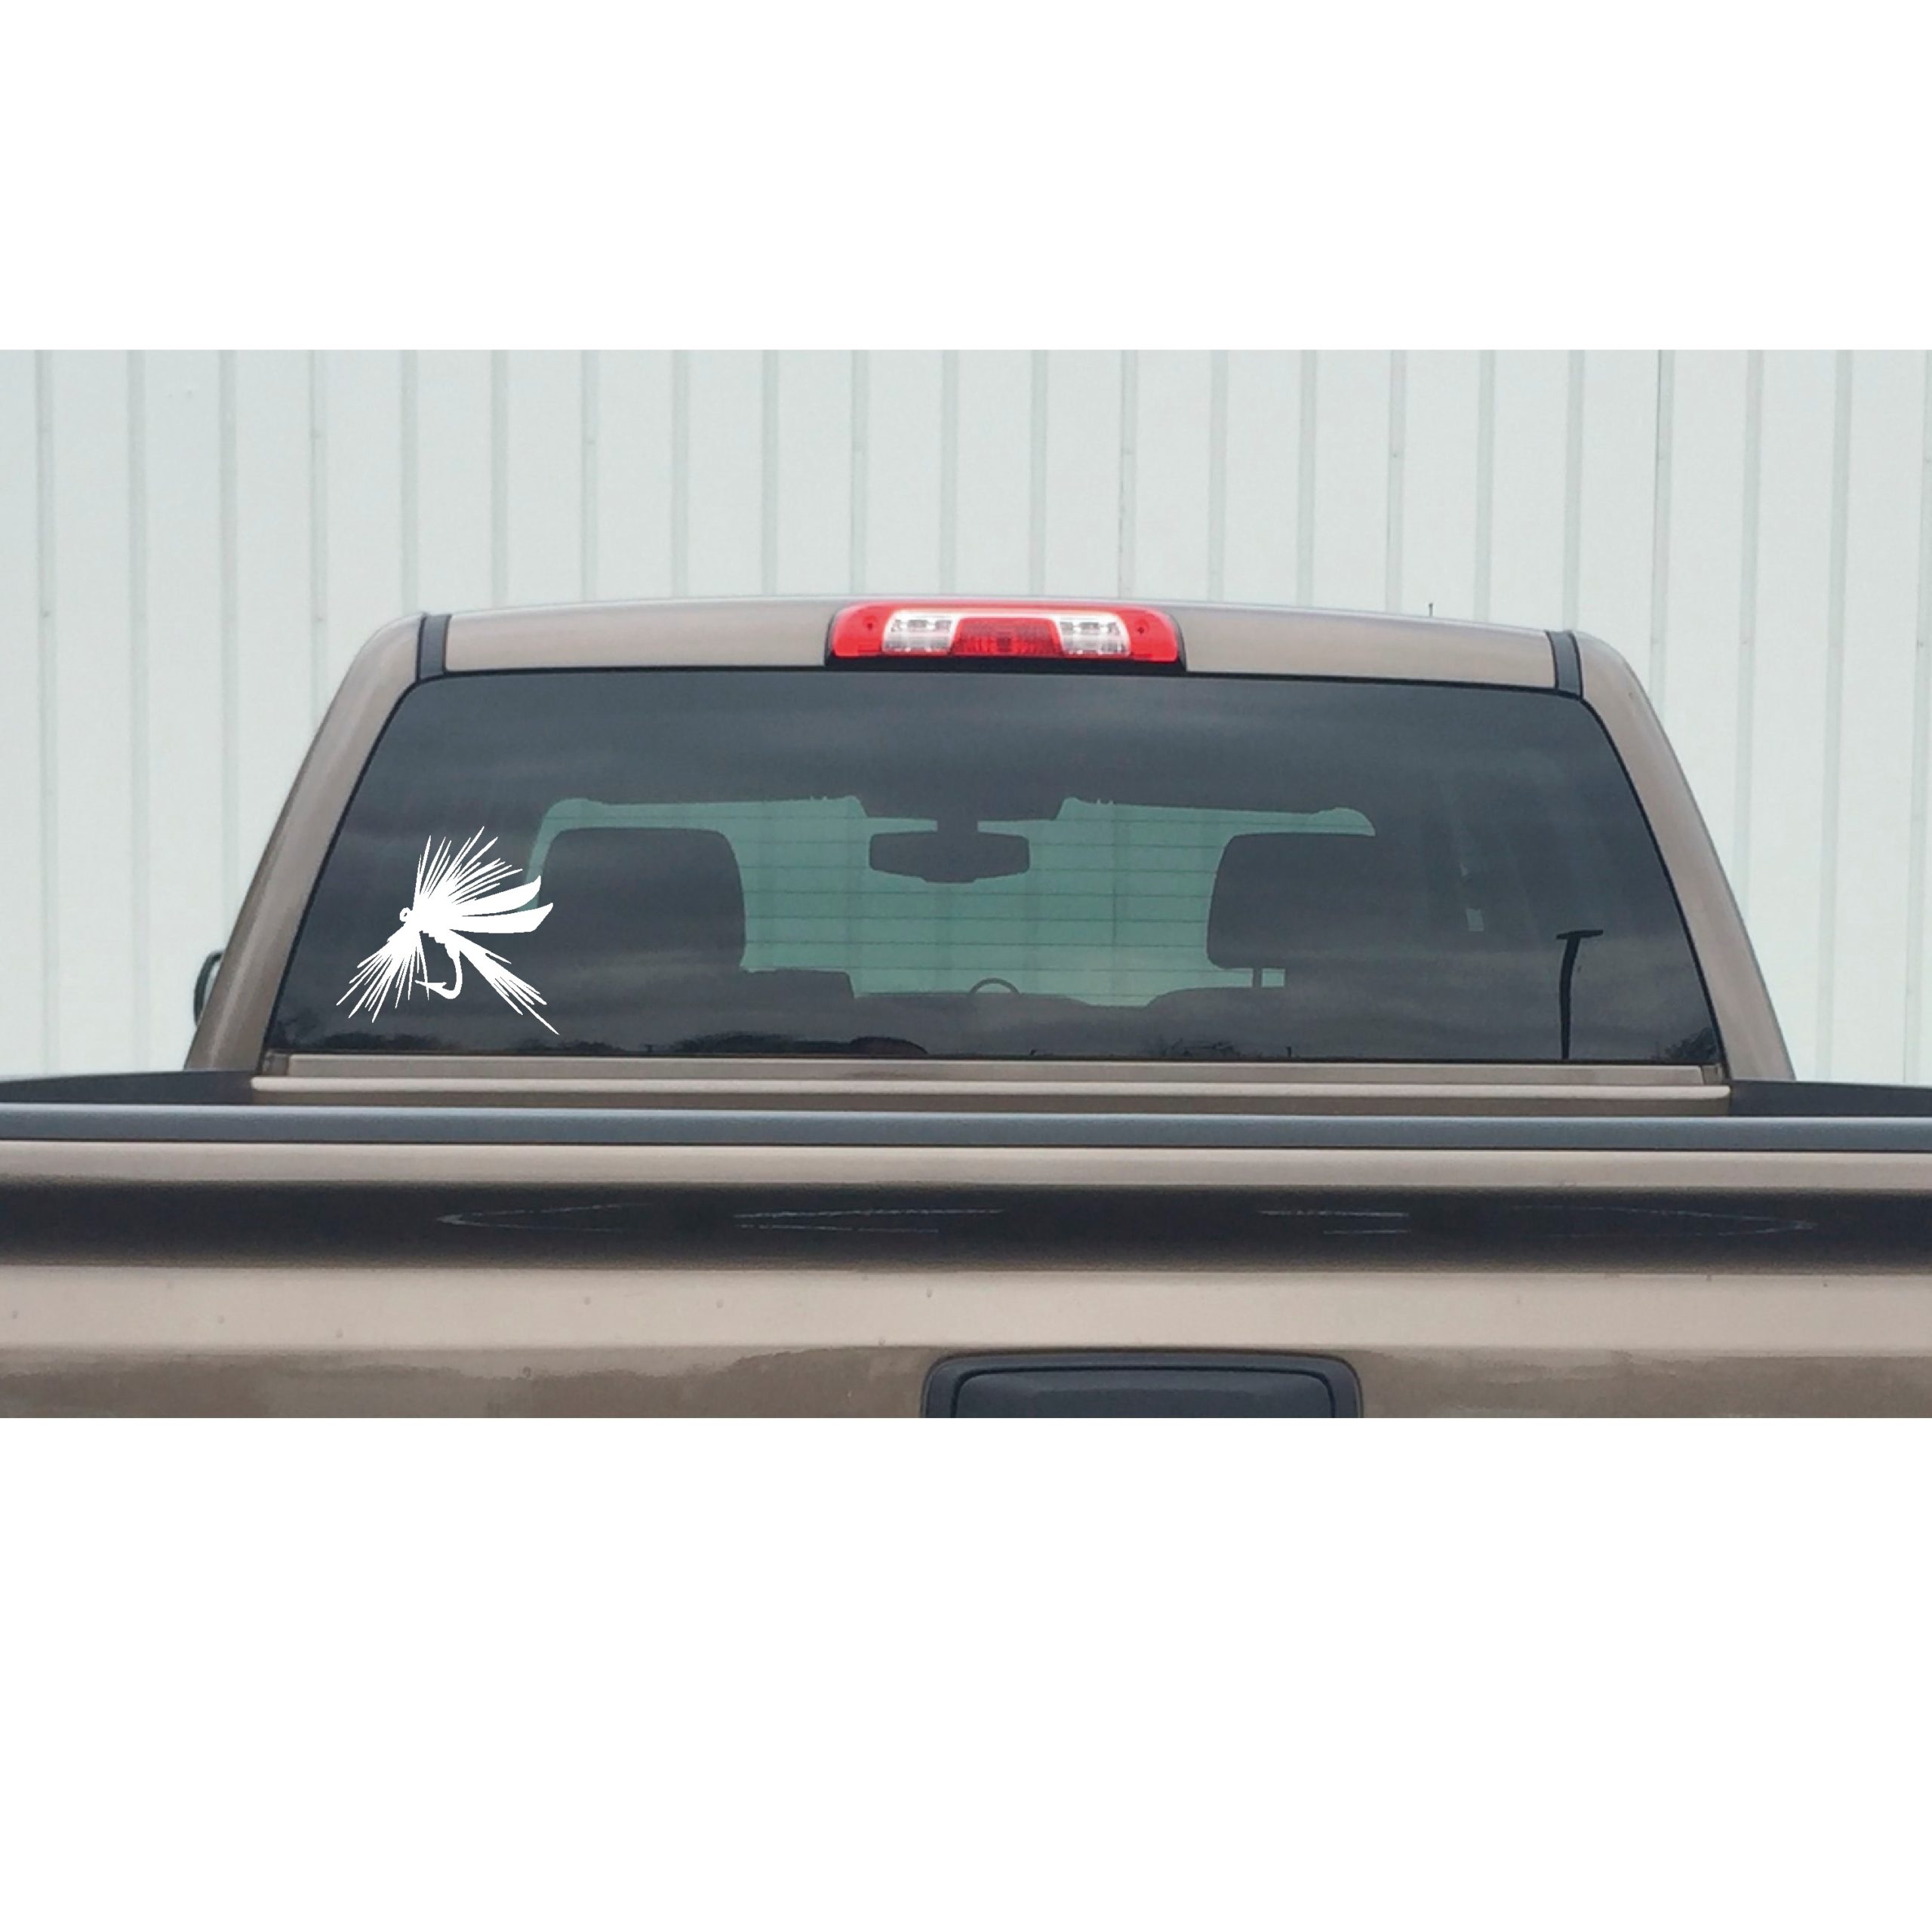 Fly Fishing Decal Trout decal Fishing Decal Lake Life Decal Vinyl Decal car  truck auto vehicle window custom sticker trout fishing decal